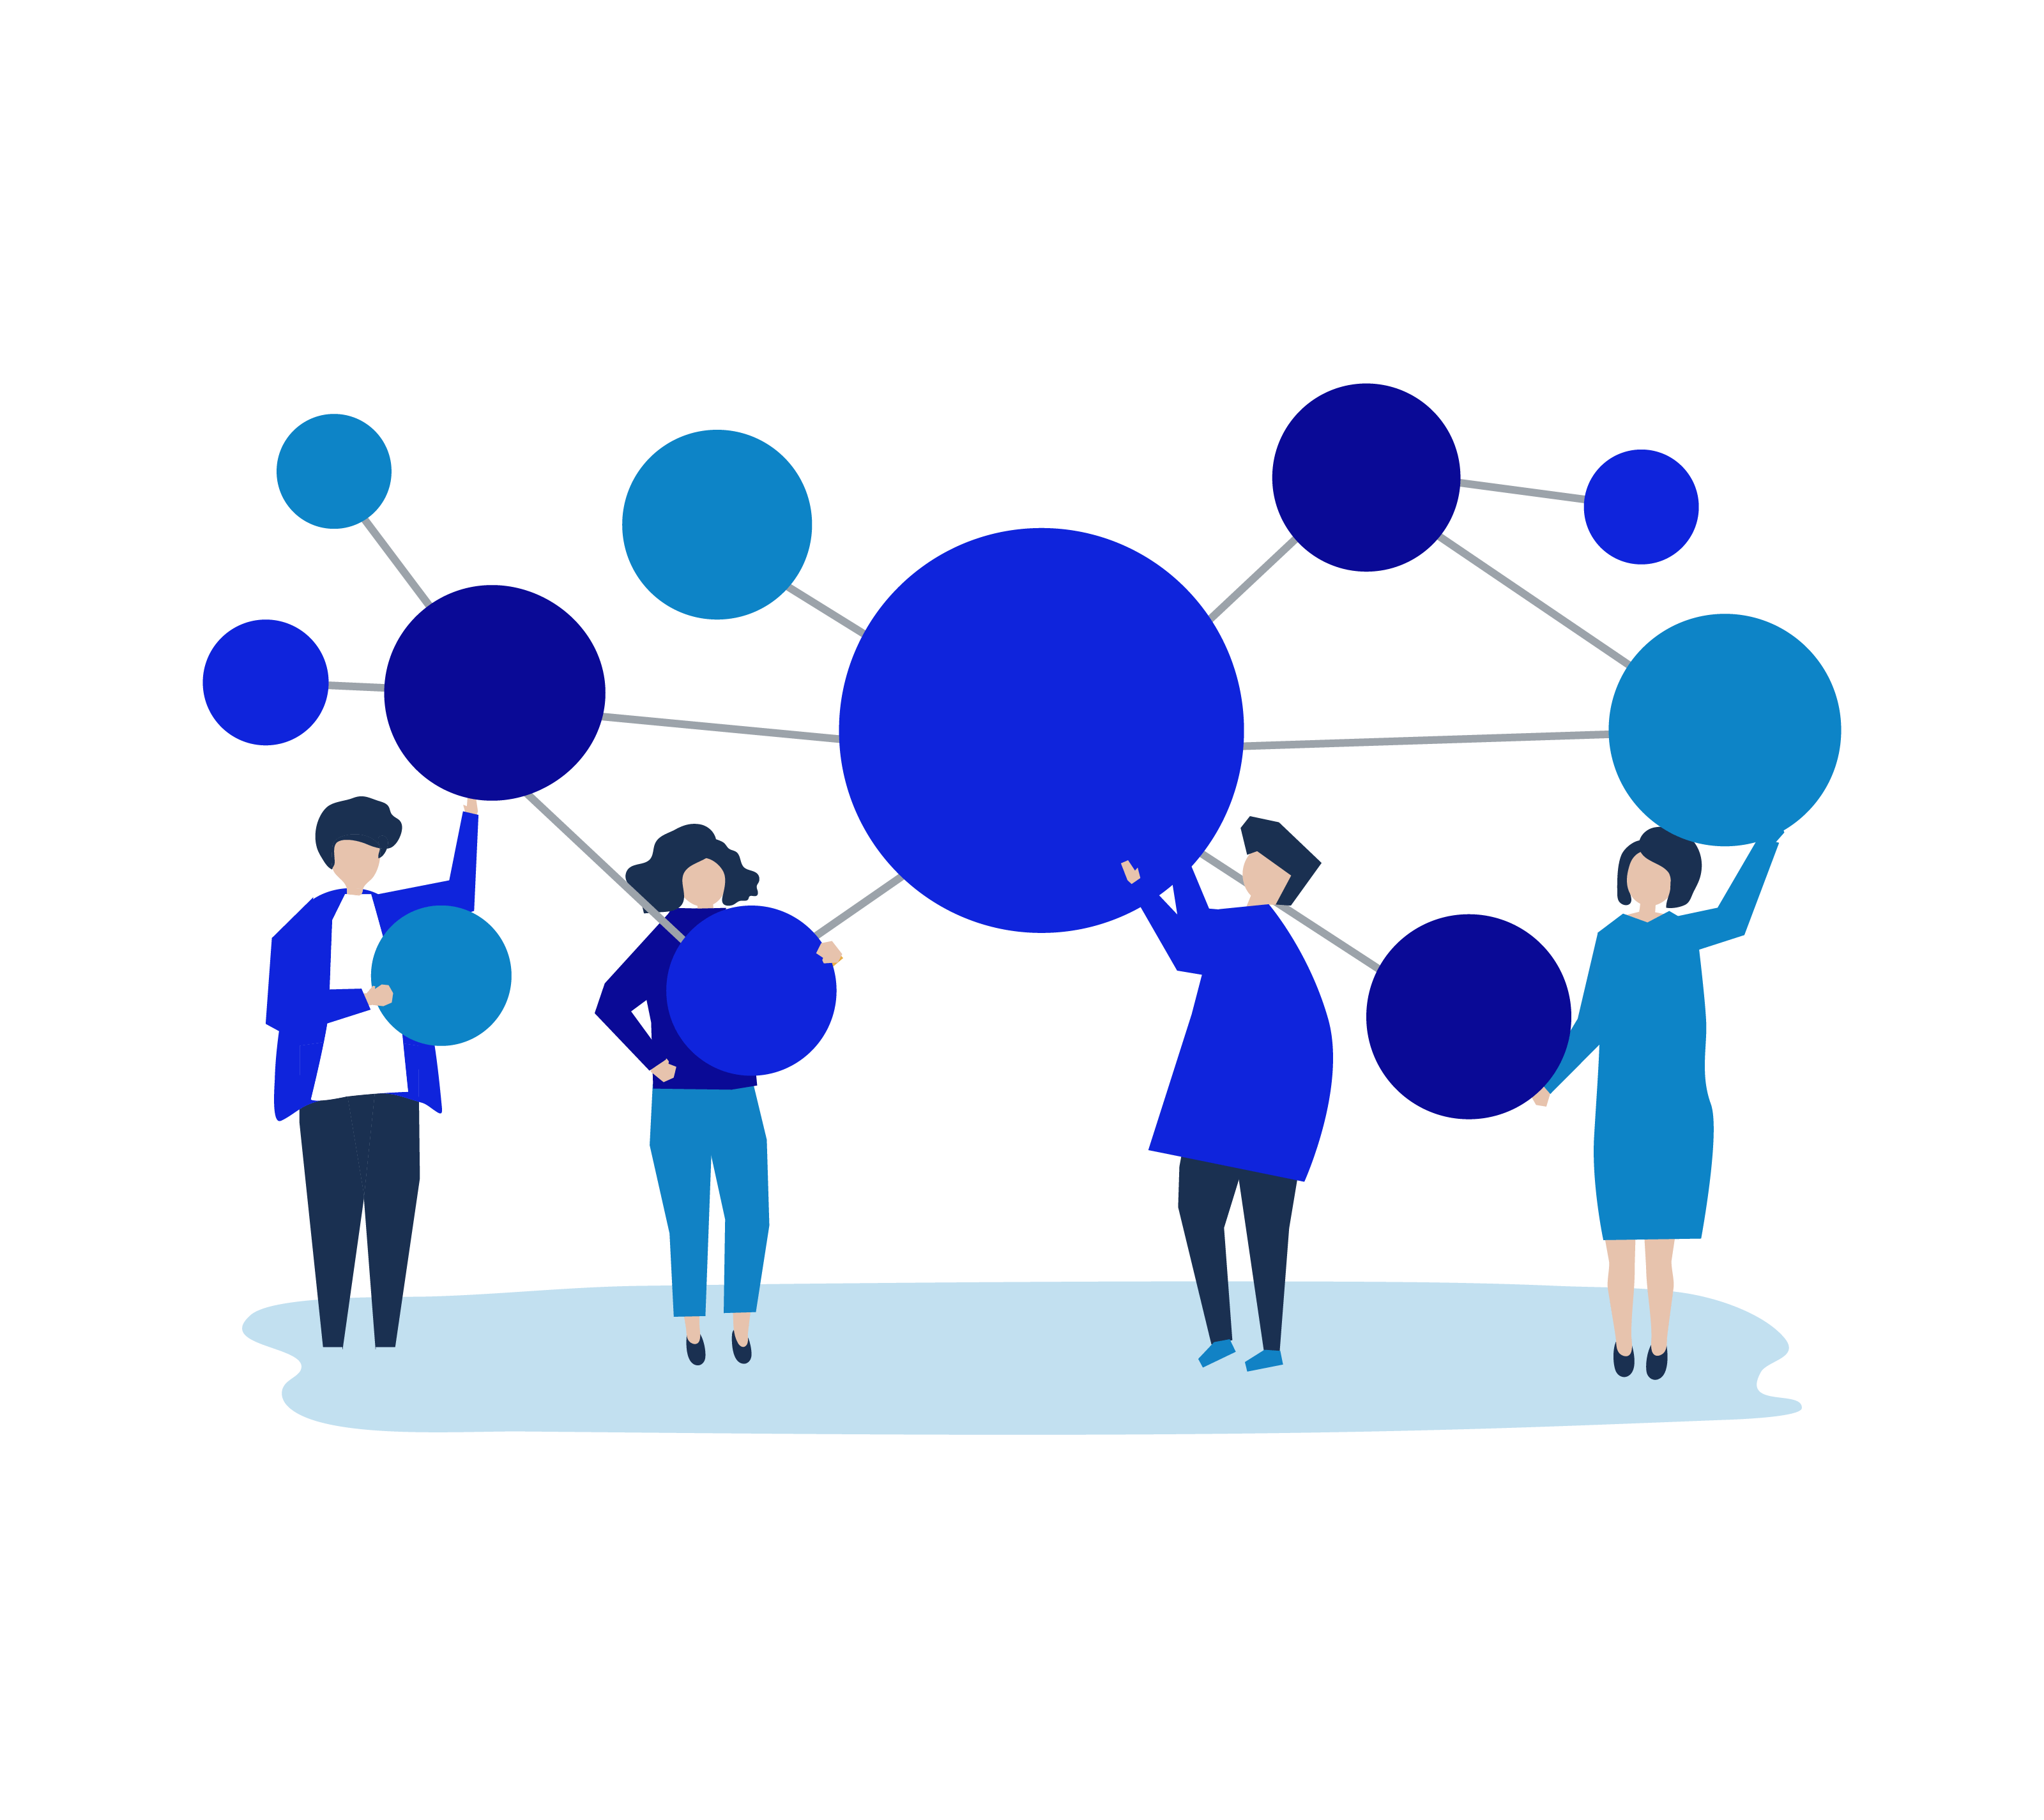 Illustration of people connected by circles